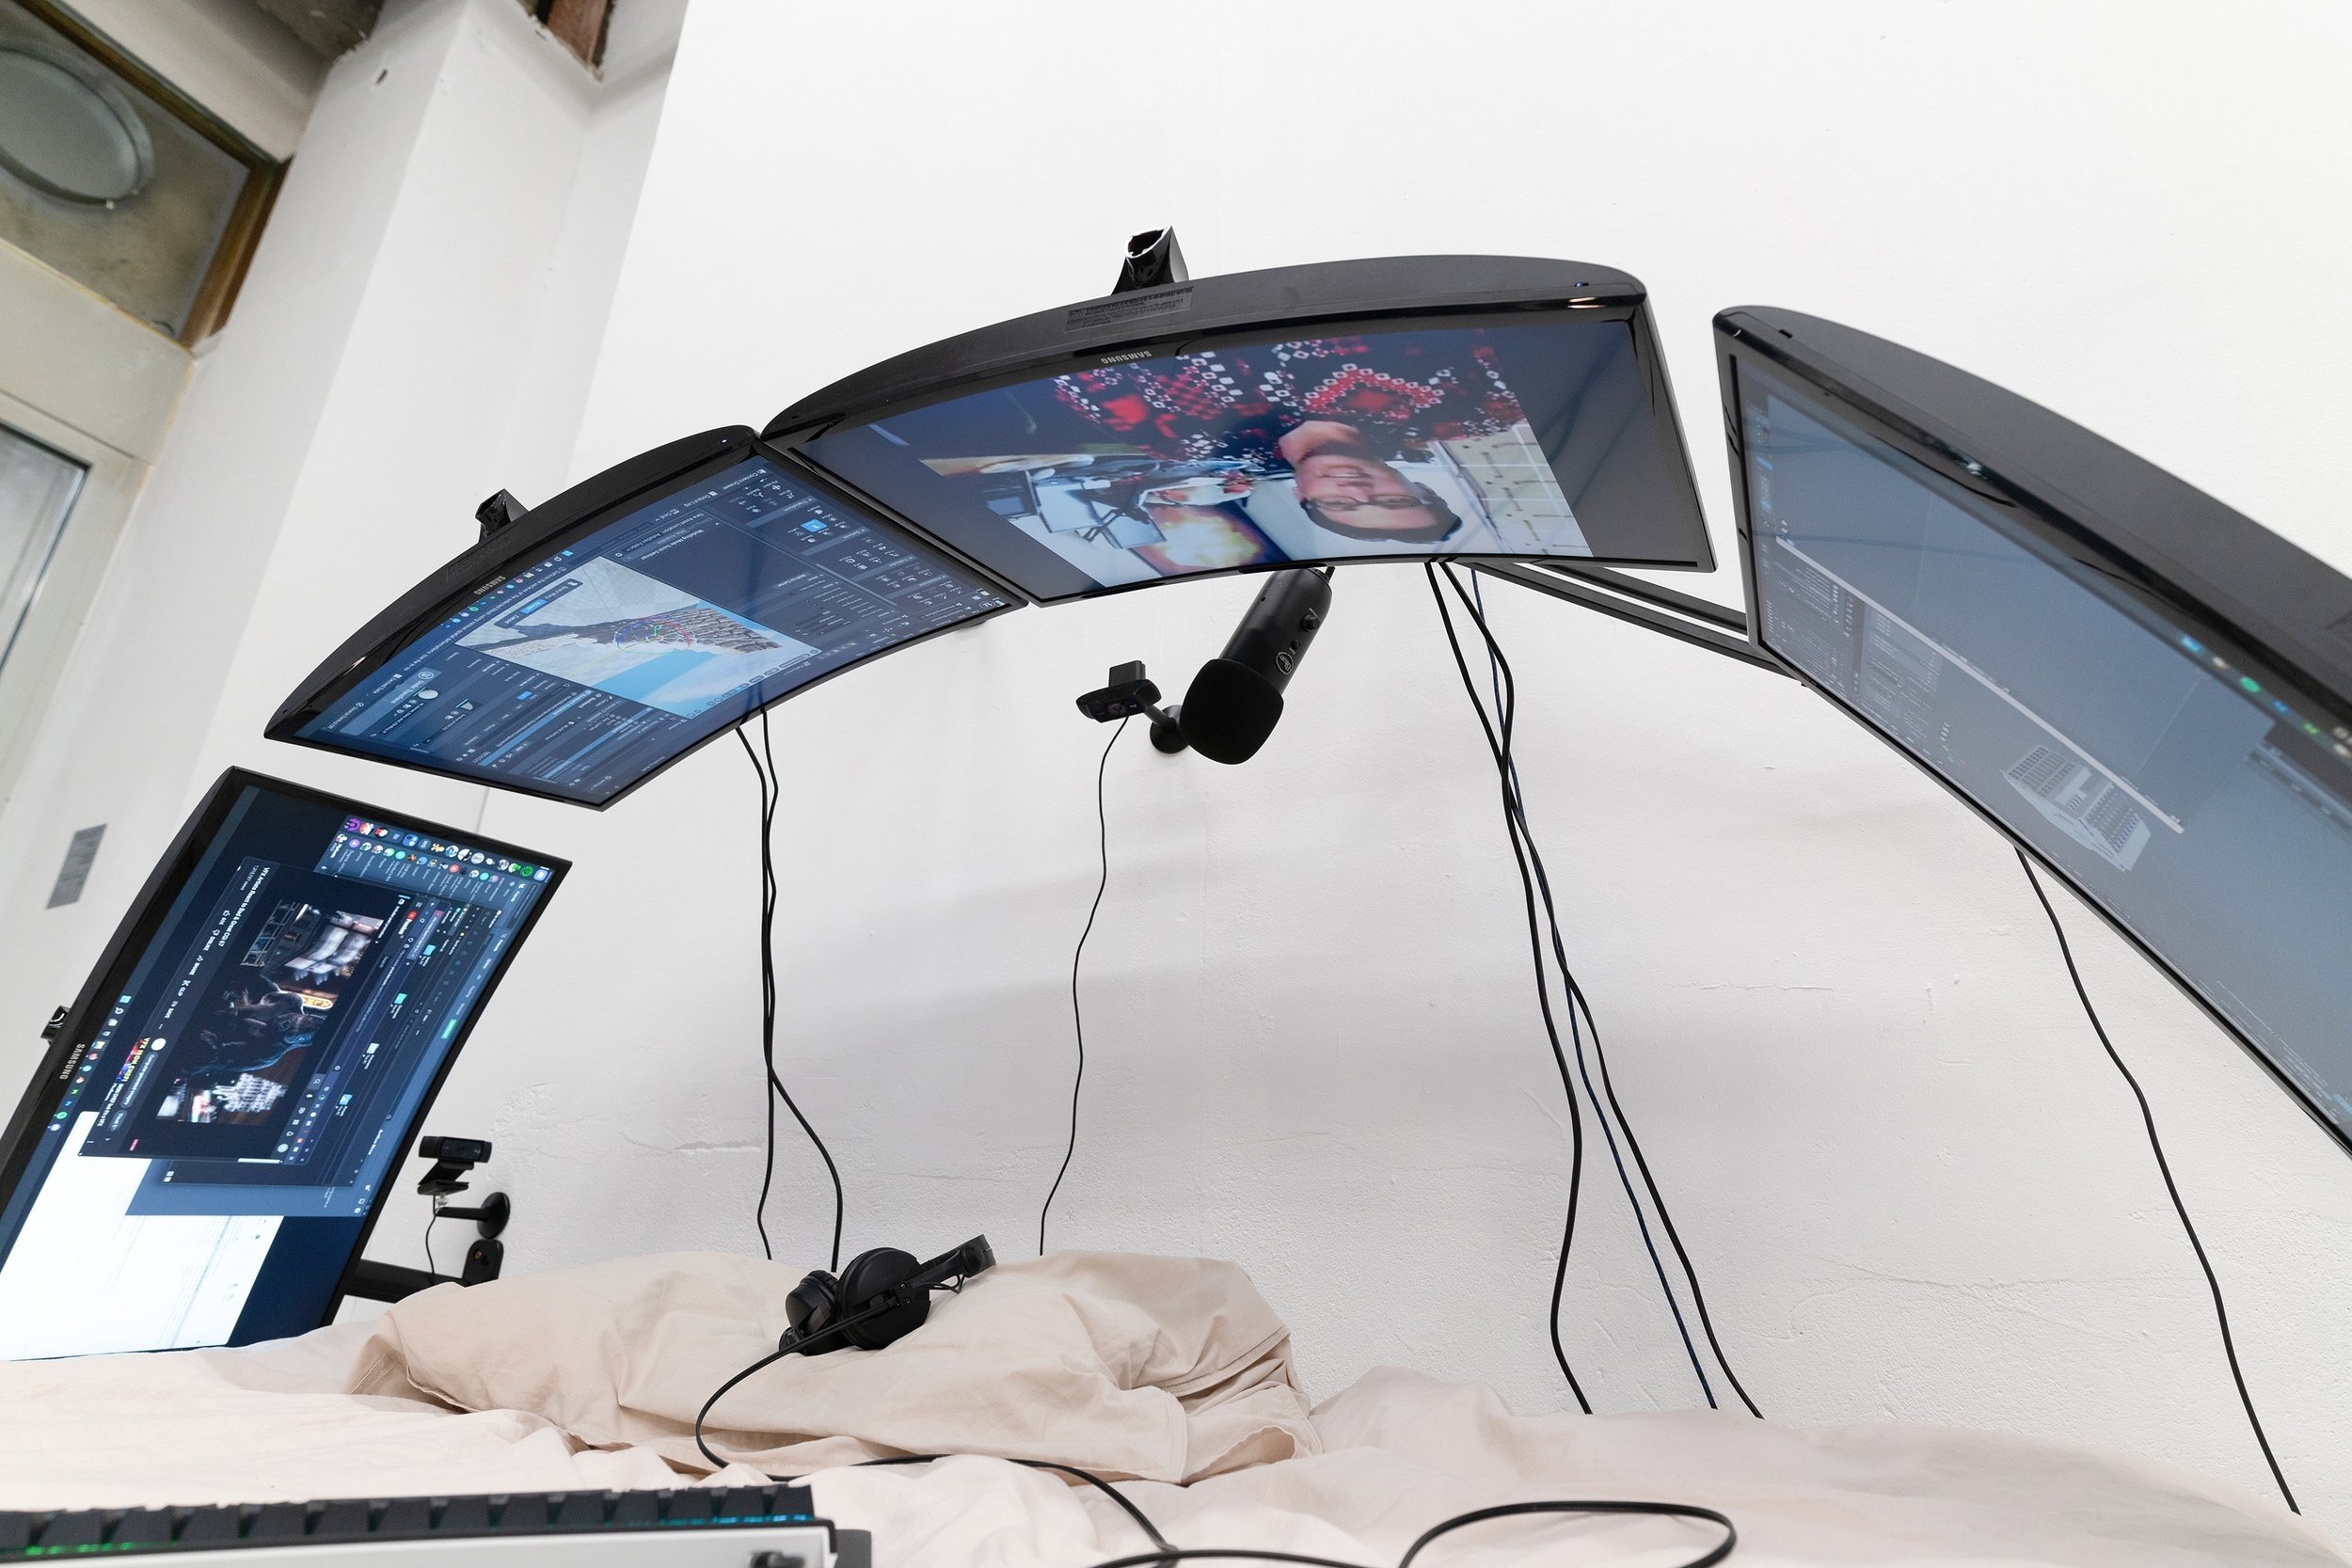  Filip Kostic,  Bed PC 2 , Custom built water cooled computer built into the frame of the bed. Variable screens to create a shield like shape, blanket, and pillows. Variable peripherals including keyboard, mouse, streaming microphone, and cameras for